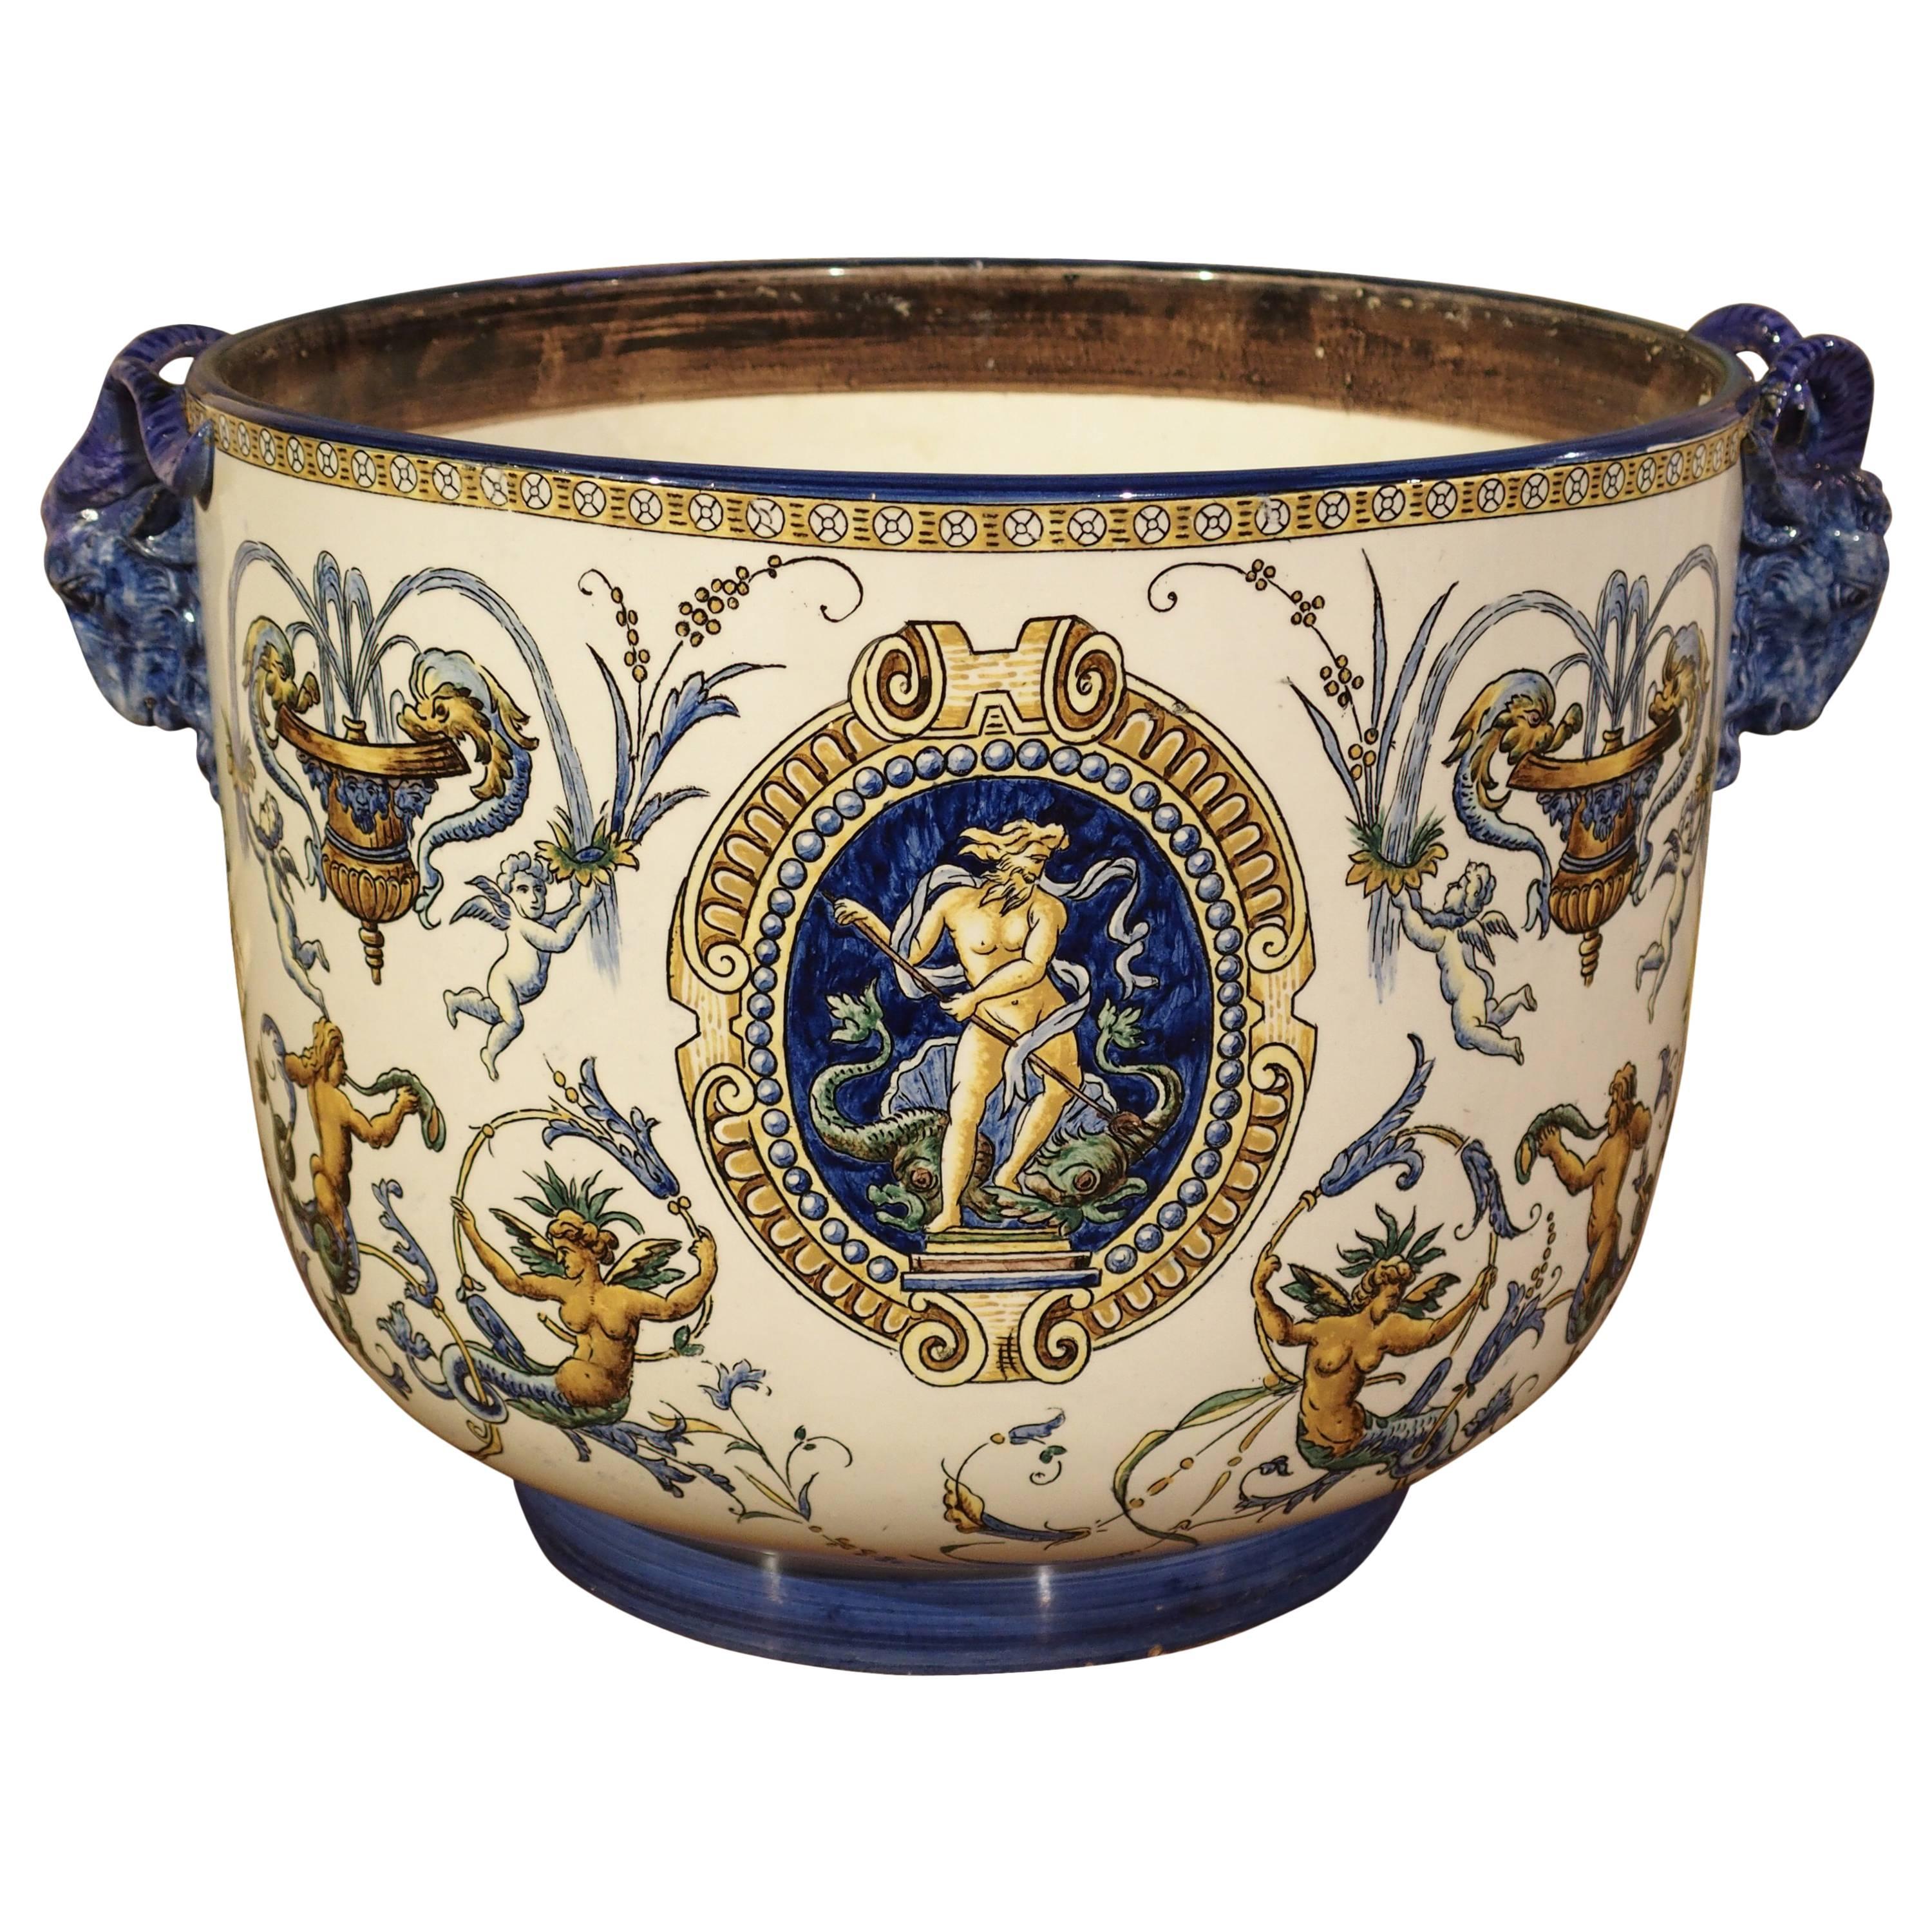 Antique French Gien Cachepot in the Renaissance Style